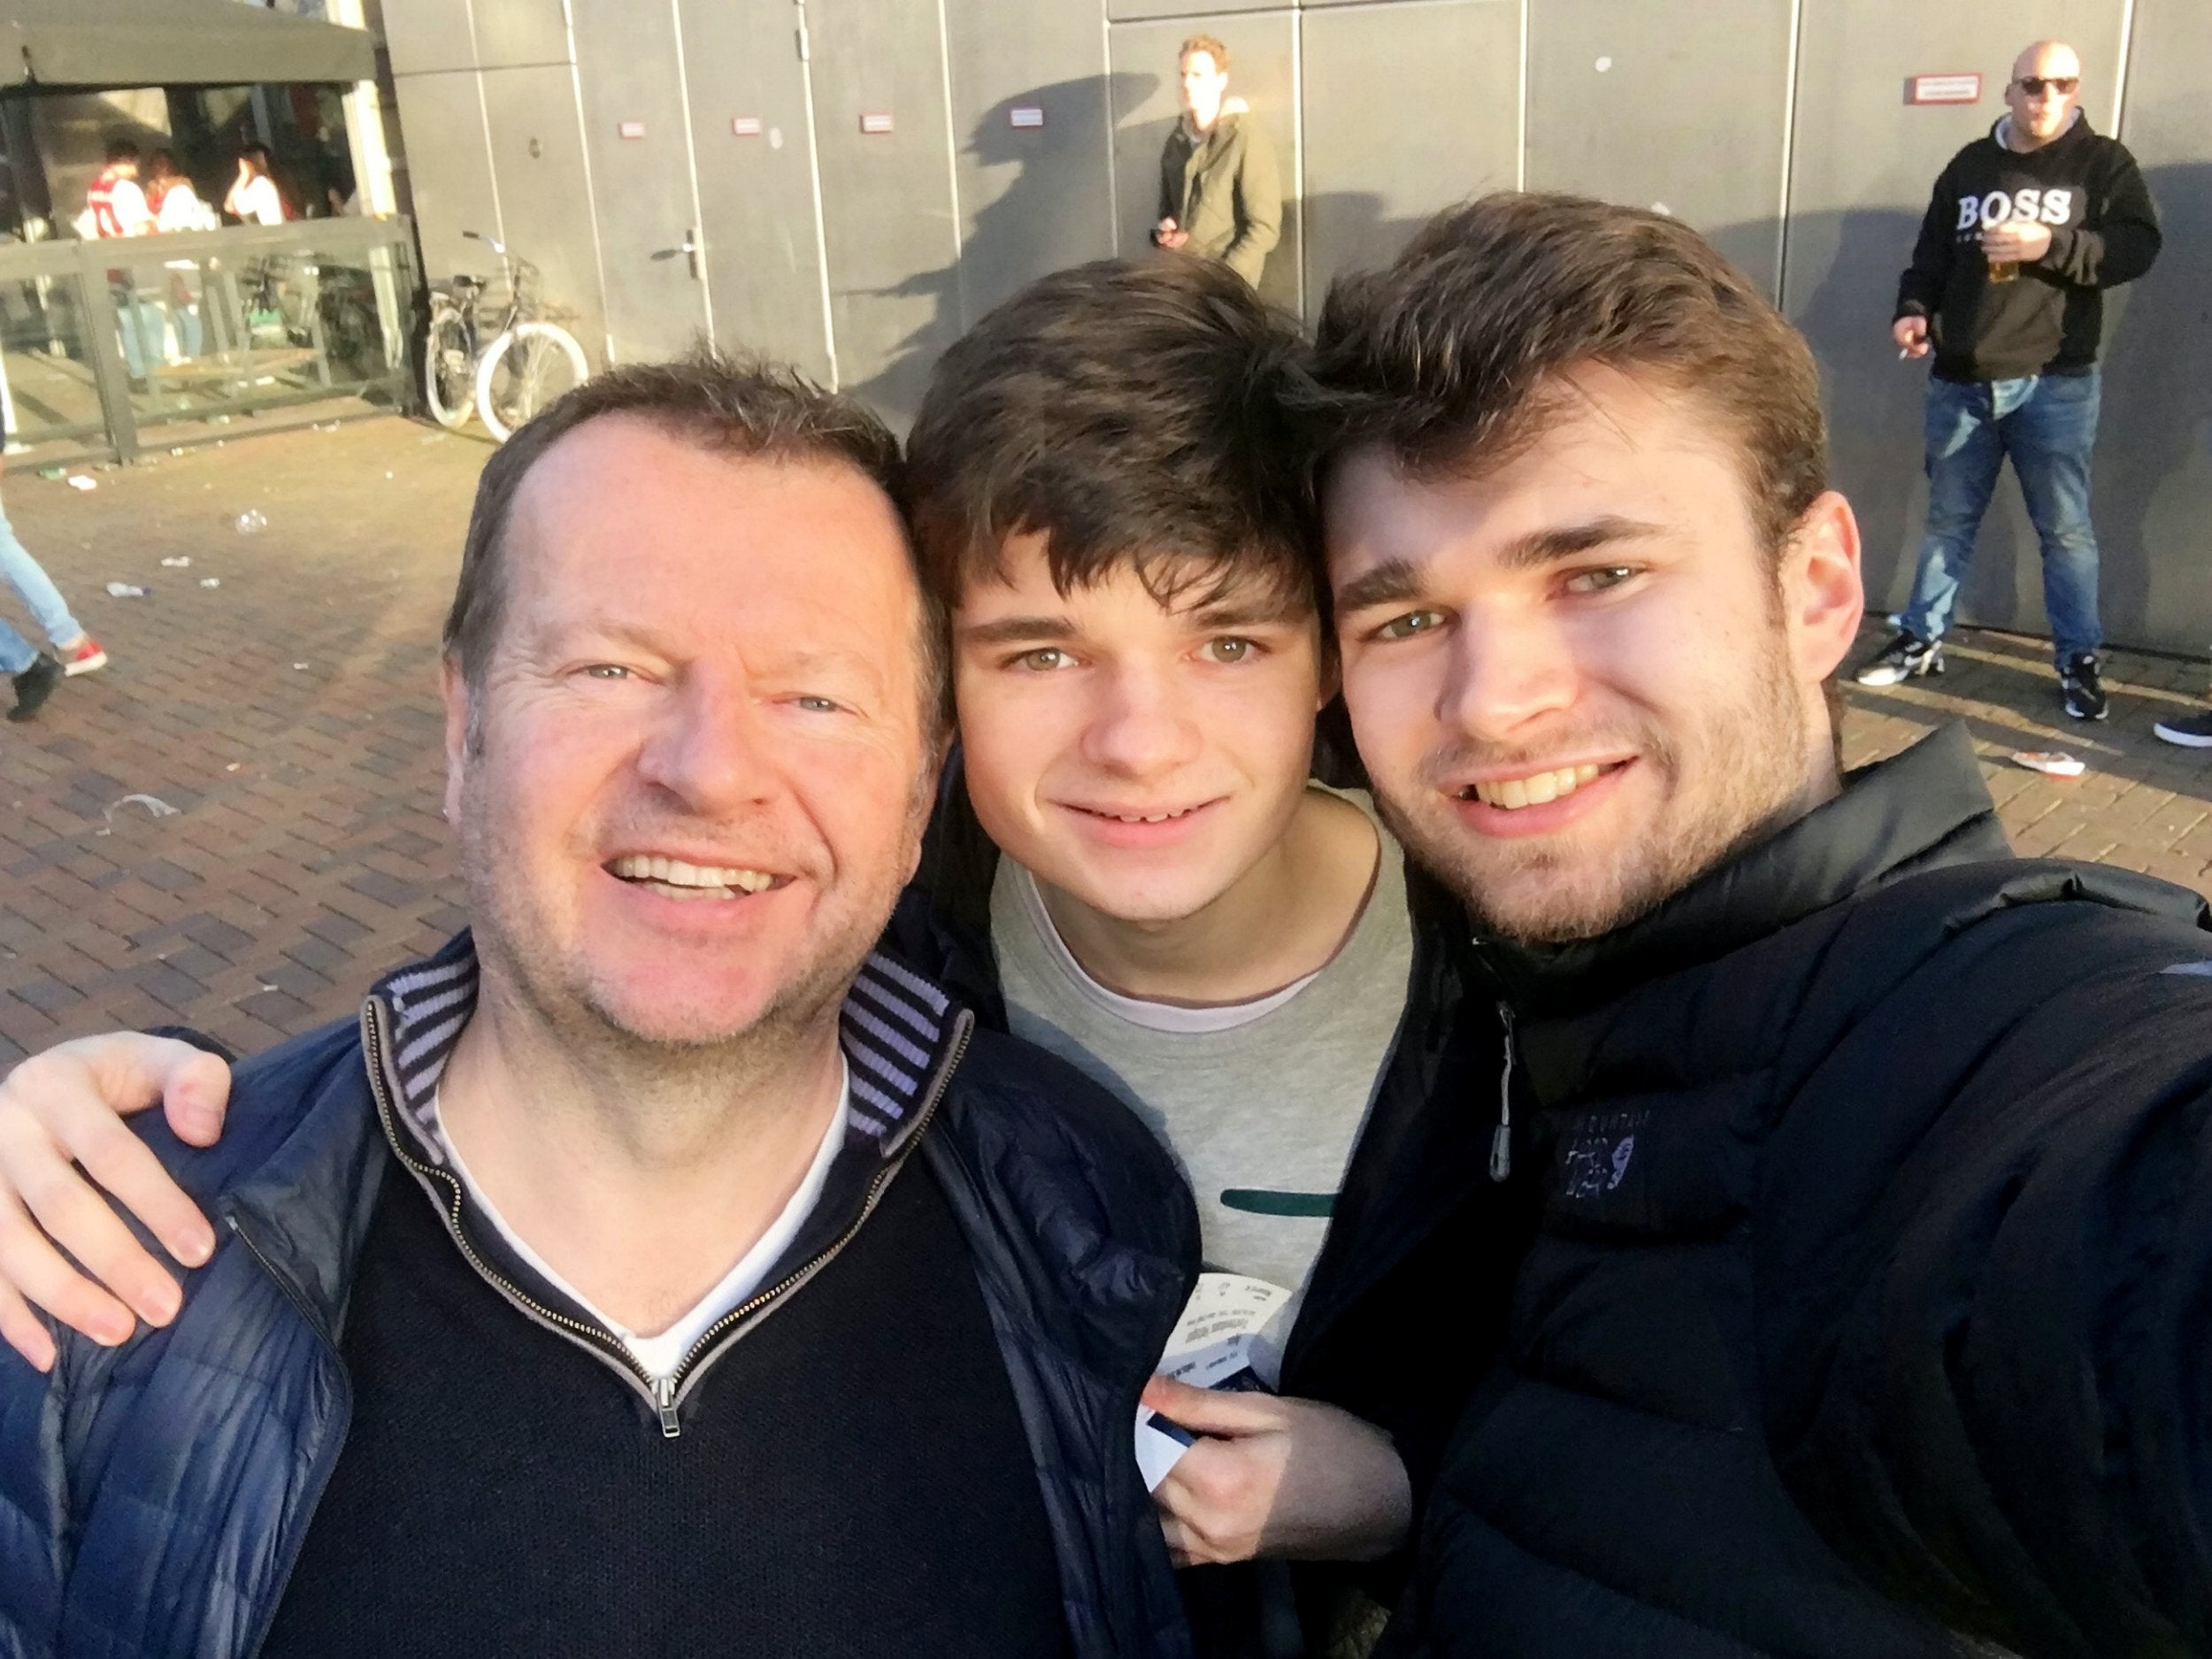 Michael (left), Will (centre) and James Perkins outside the stadium. The trio missed Spurs' comeback after accidentally leaving the ground at halftime